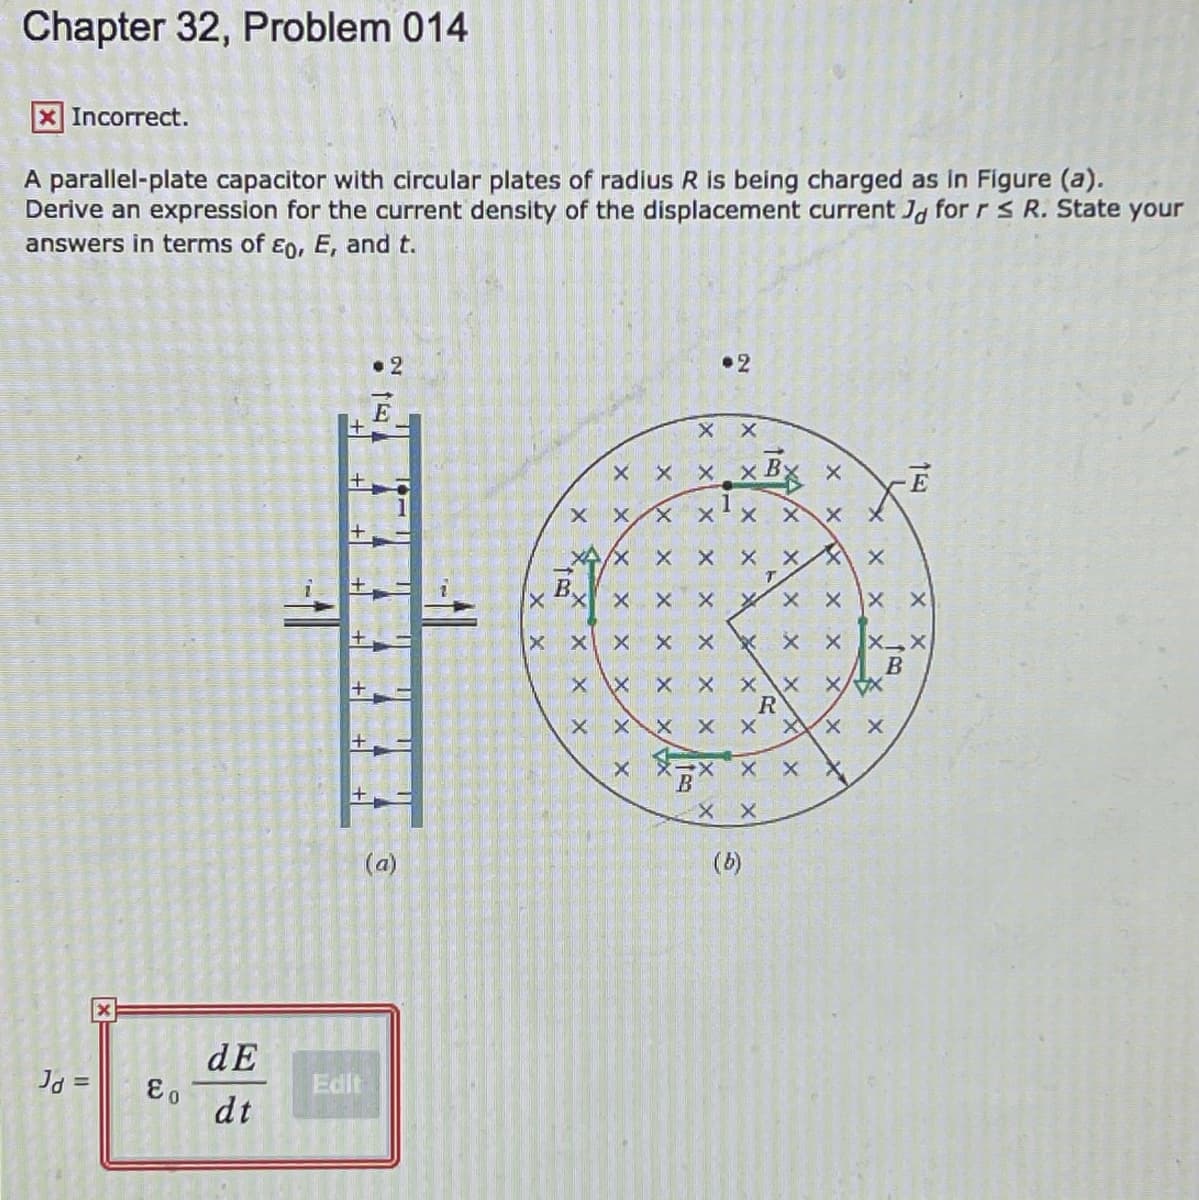 Chapter 32, Problem 014
XIncorrect.
A parallel-plate capacitor with circular plates of radius R is being charged as in Figure (a).
Derive an expression for the current density of the displacement current Jg for r s R. State your
answers in terms of Eo, E, and t.
• 2
•2
E
X X
x Bx x
X X
× メ
X.
X X X X
B
XX X X XX X
X X X
(a)
(b)
dE
Jd =
Edit
dt
X X
+
